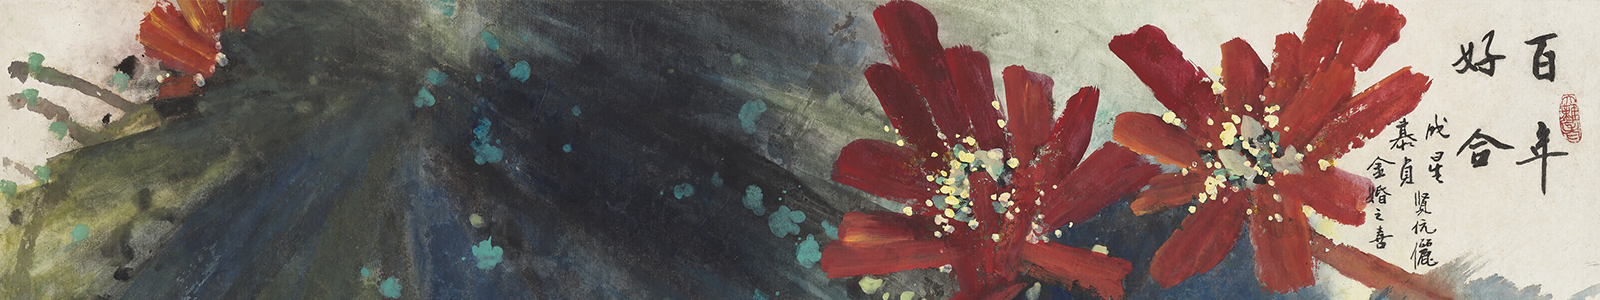 Summer Reverie: Chinese Paintings Online